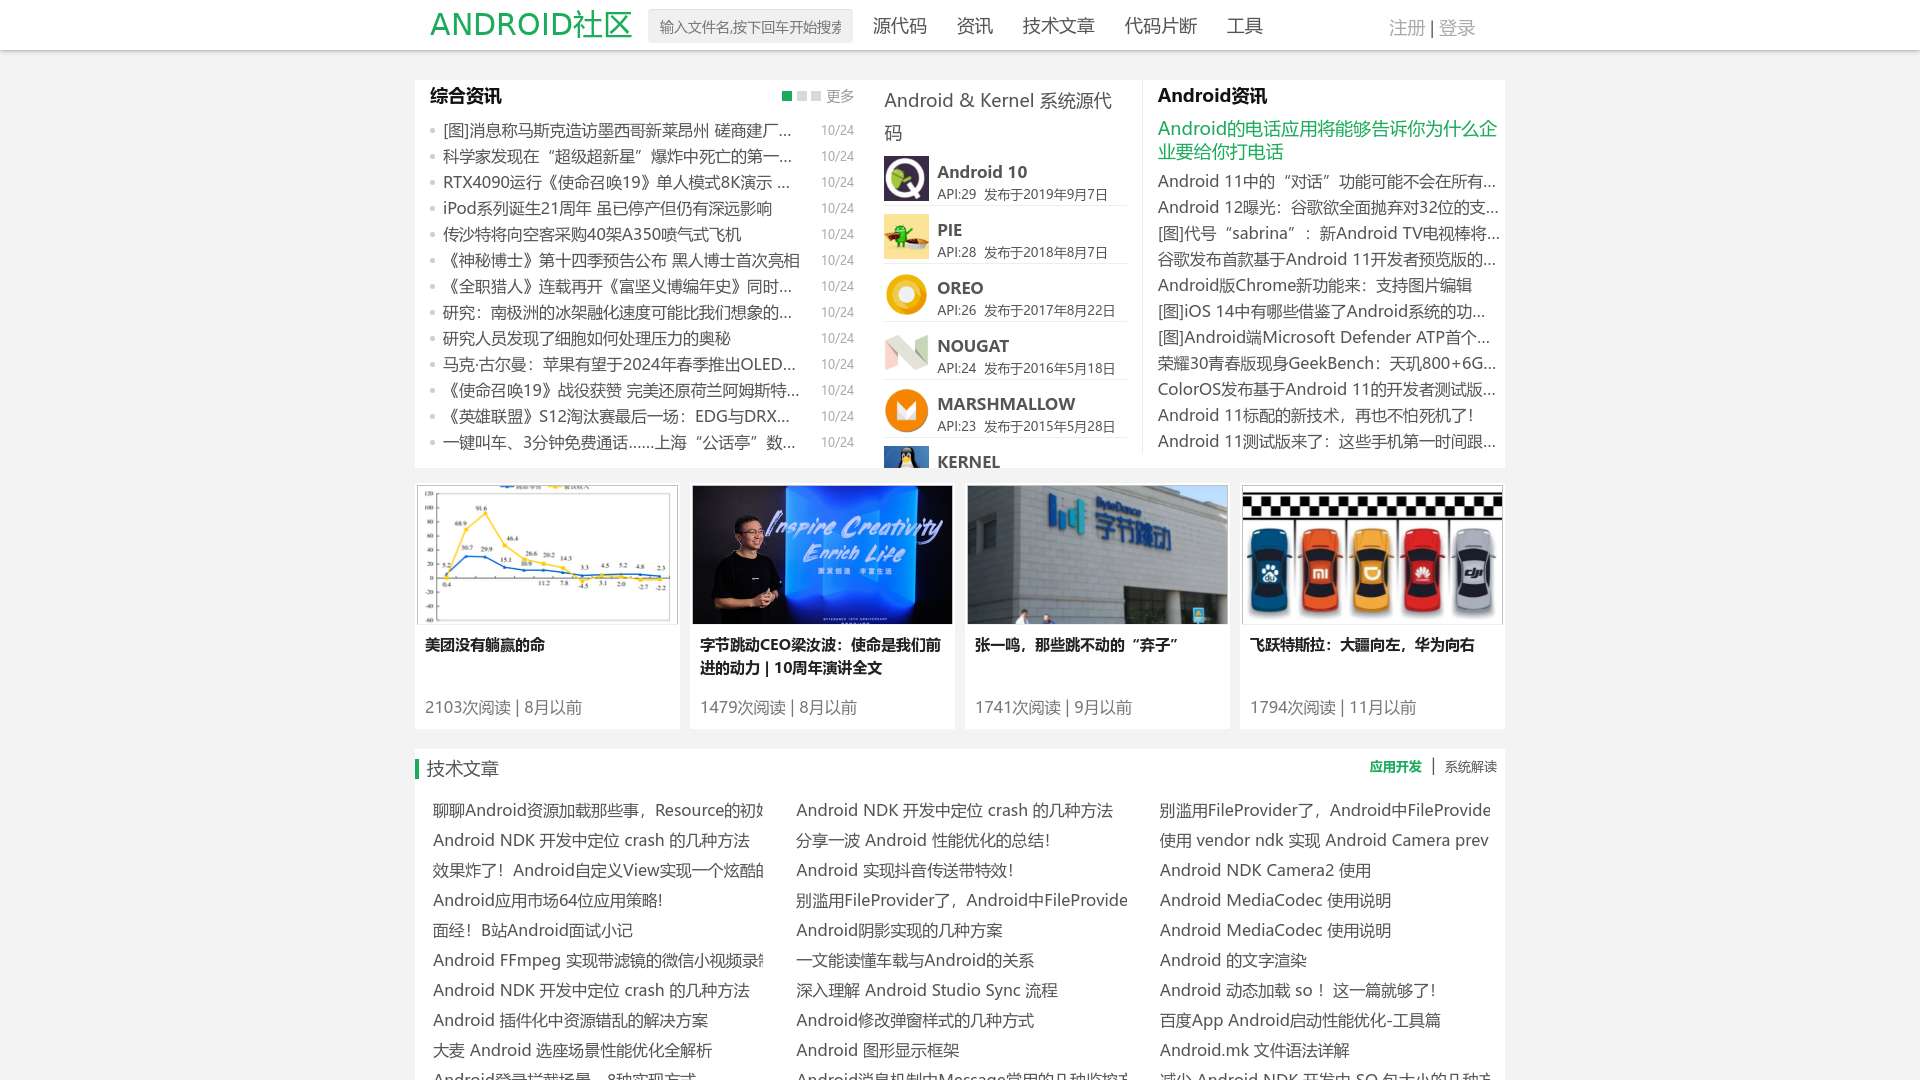 Android社区 - https://www.androidos.net.cn截图时间：2022-12-09